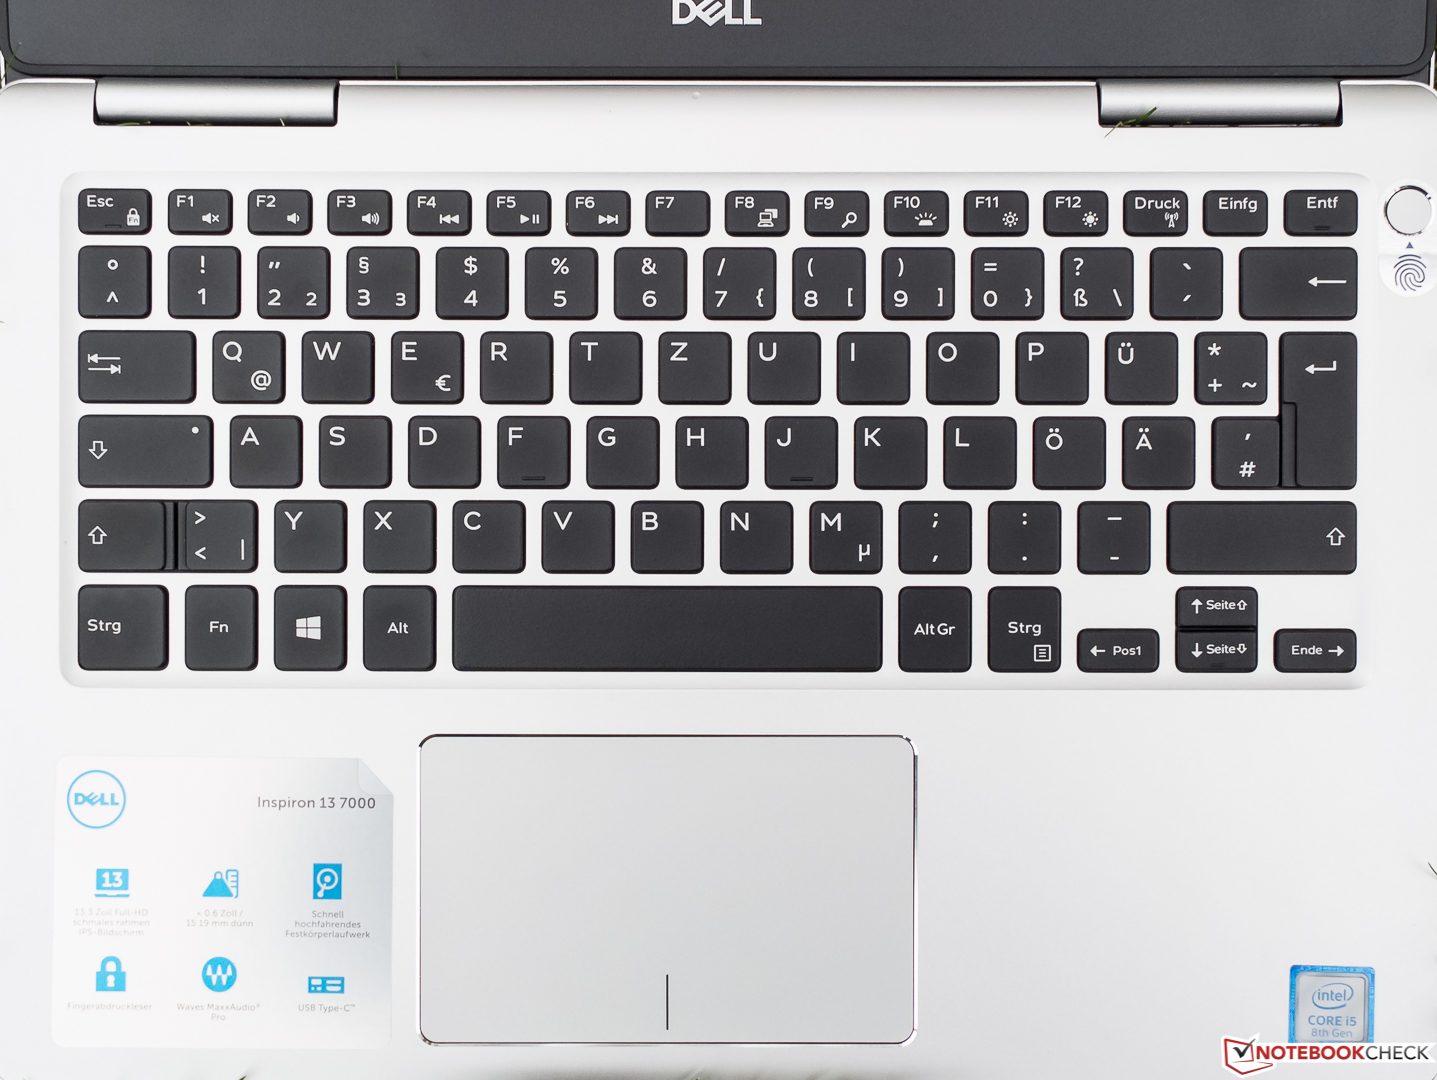 Dell Inspiron 13 7370 (i5-8250U) Laptop Review - NotebookCheck.net